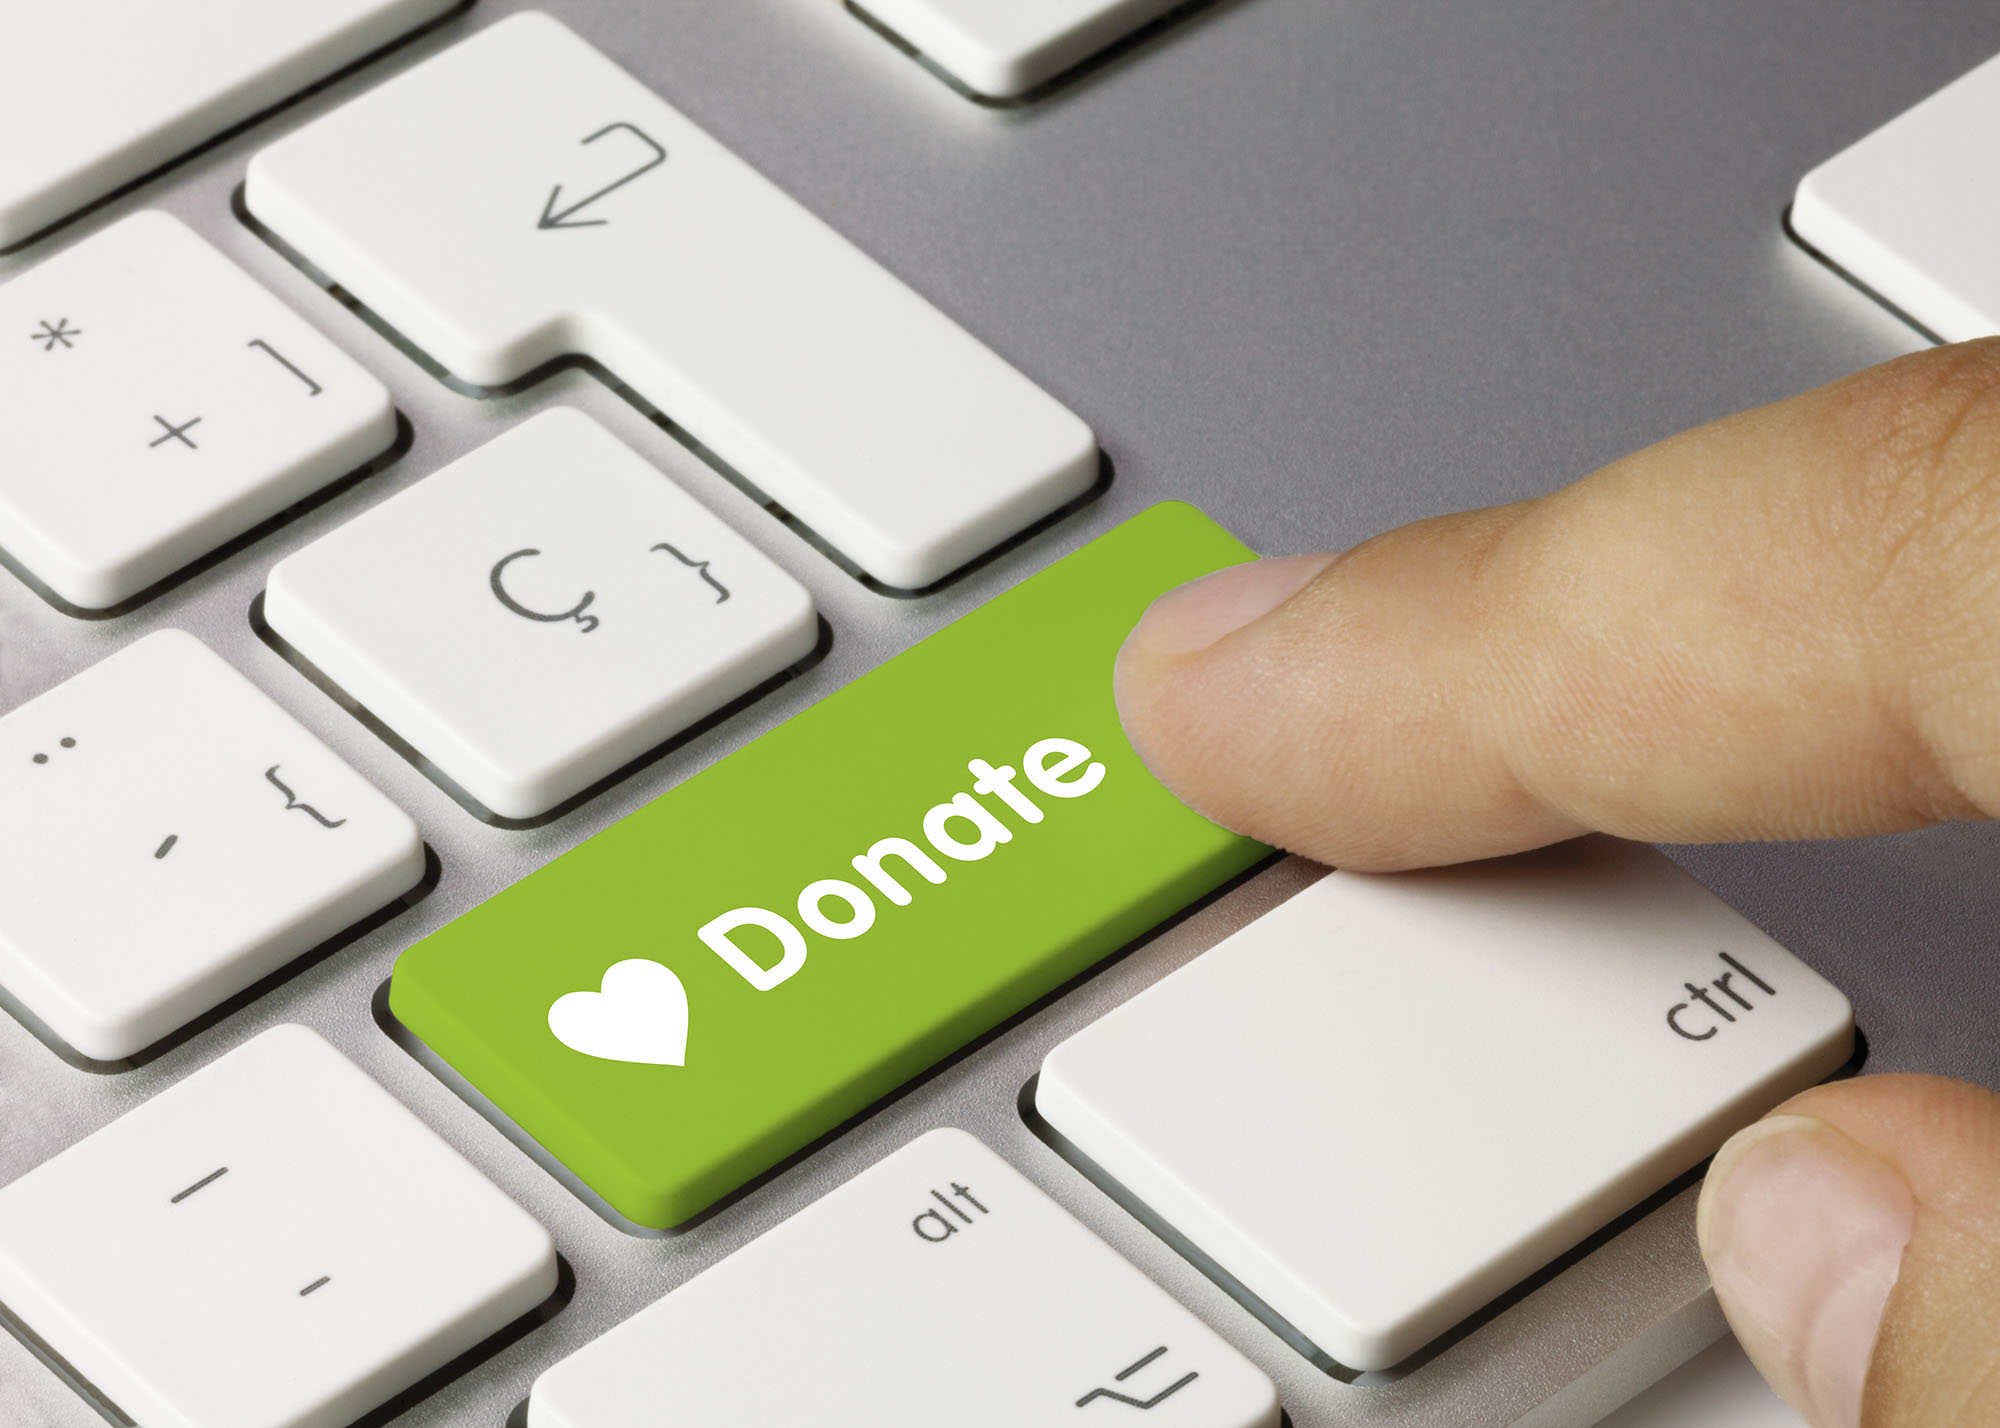 A white and silver computer keyboard has a bright green button with a heart and the word "Donate" which is being pressed by a finger